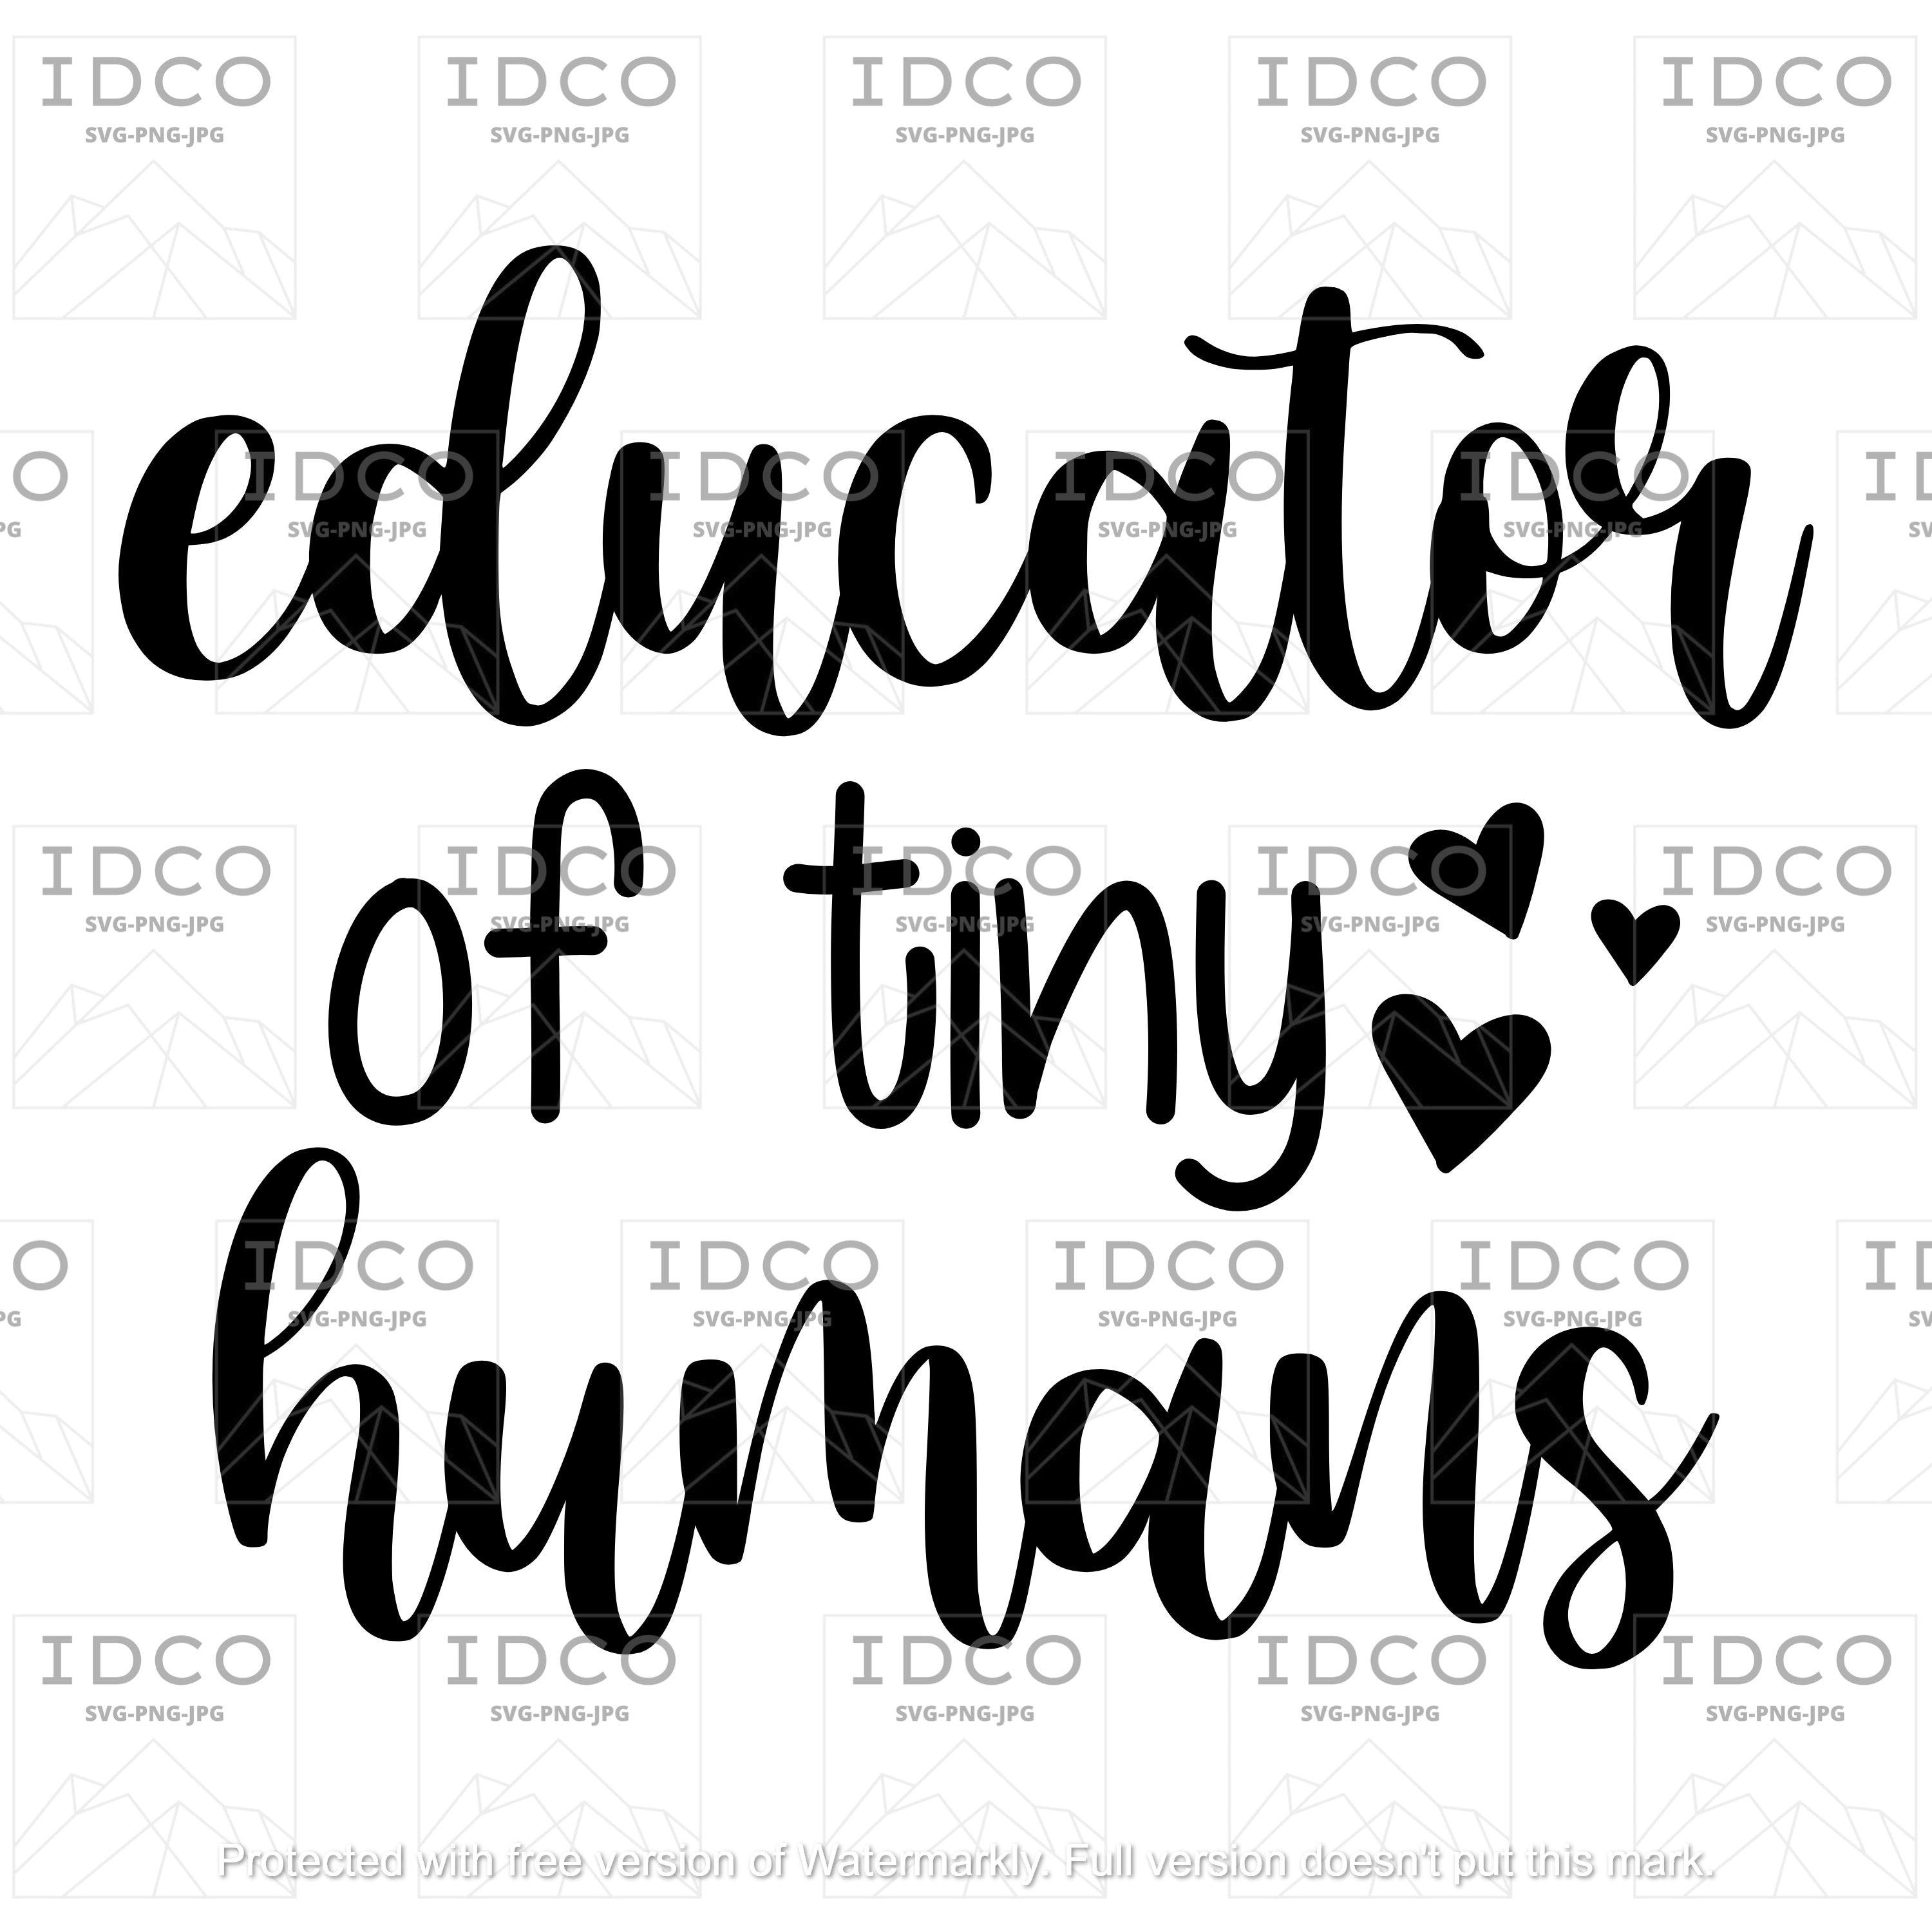 Educator Of Tiny Humans - SVG/PNG/JPG File